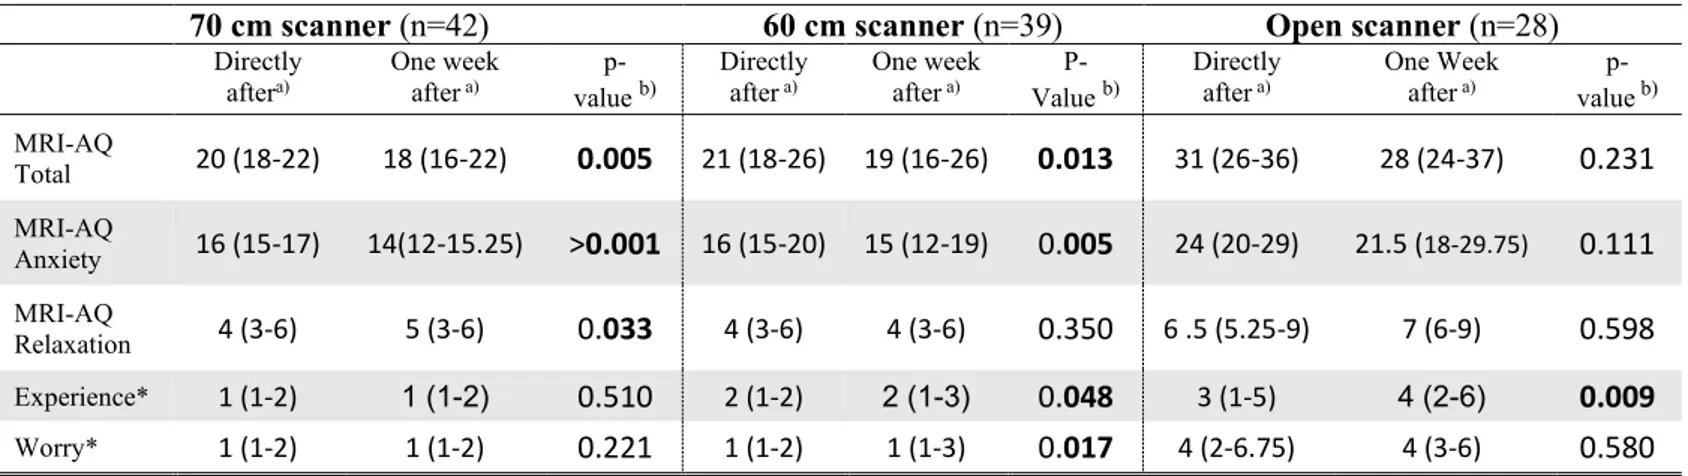 Table 6. Comparison between patient ratings of MRI-AQ, experience and worry directly and one week after the  examination